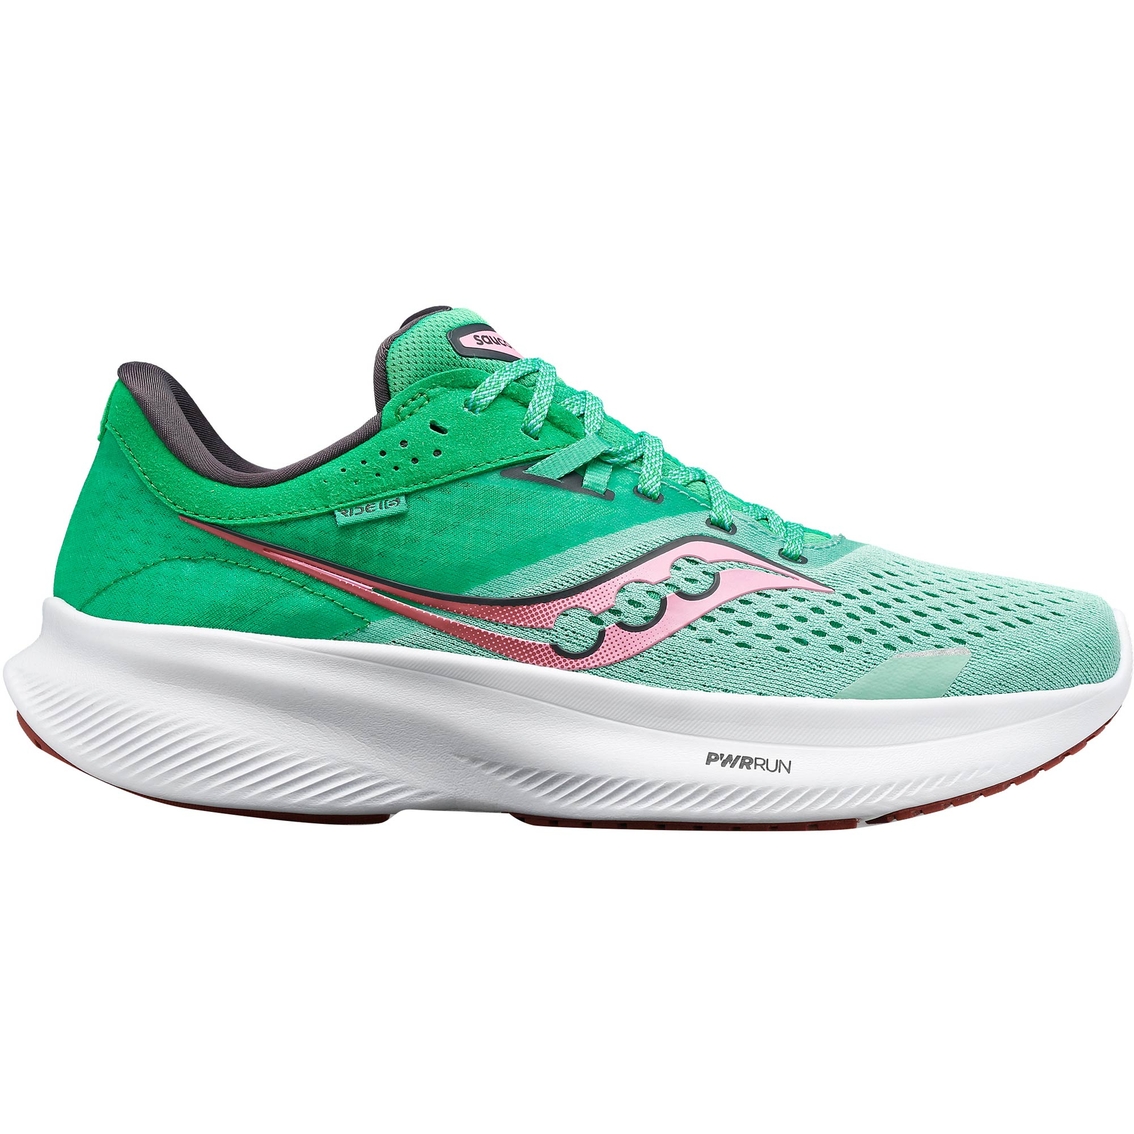 Saucony Women's Ride 16 Running Shoes - Image 2 of 5